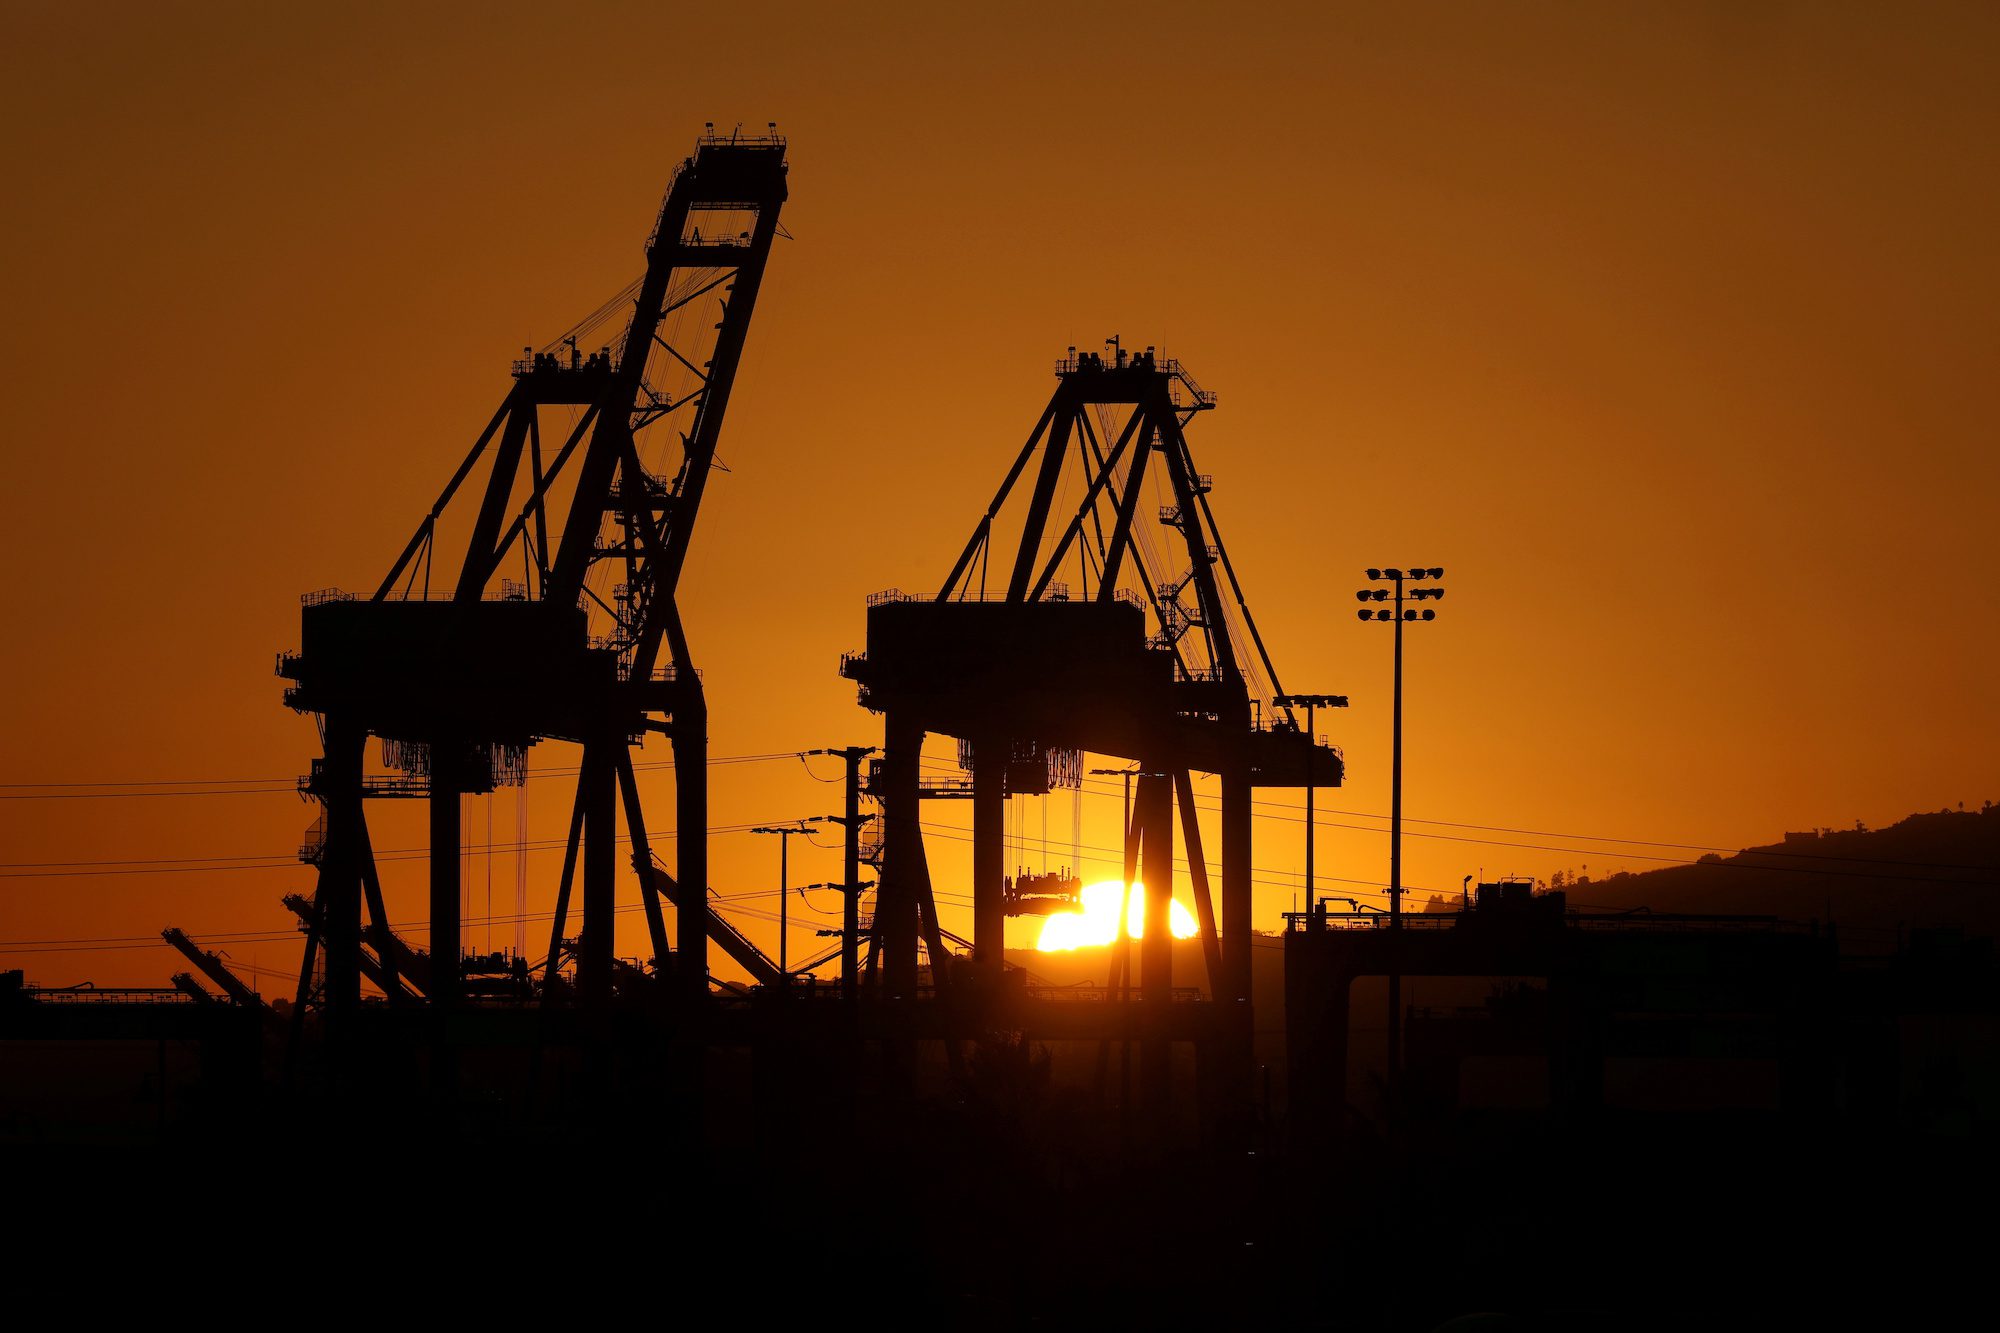 Dockworkers’ Union ILWU Files for Chapter 11 Amid Decade-Long Legal Battle